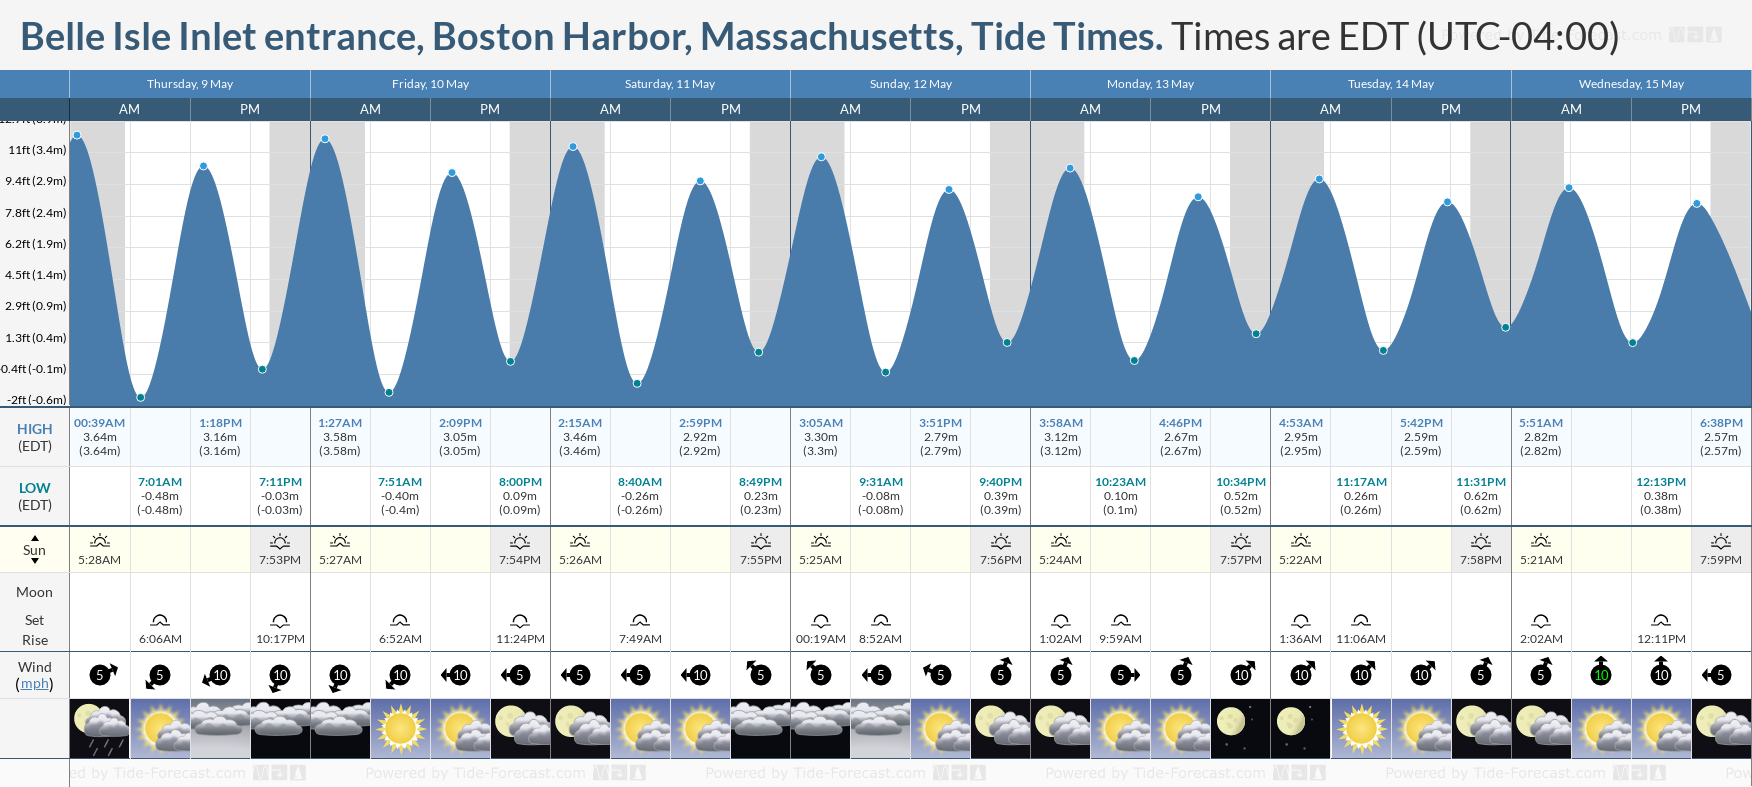 Belle Isle Inlet entrance, Boston Harbor, Massachusetts Tide Chart including high and low tide tide times for the next 7 days